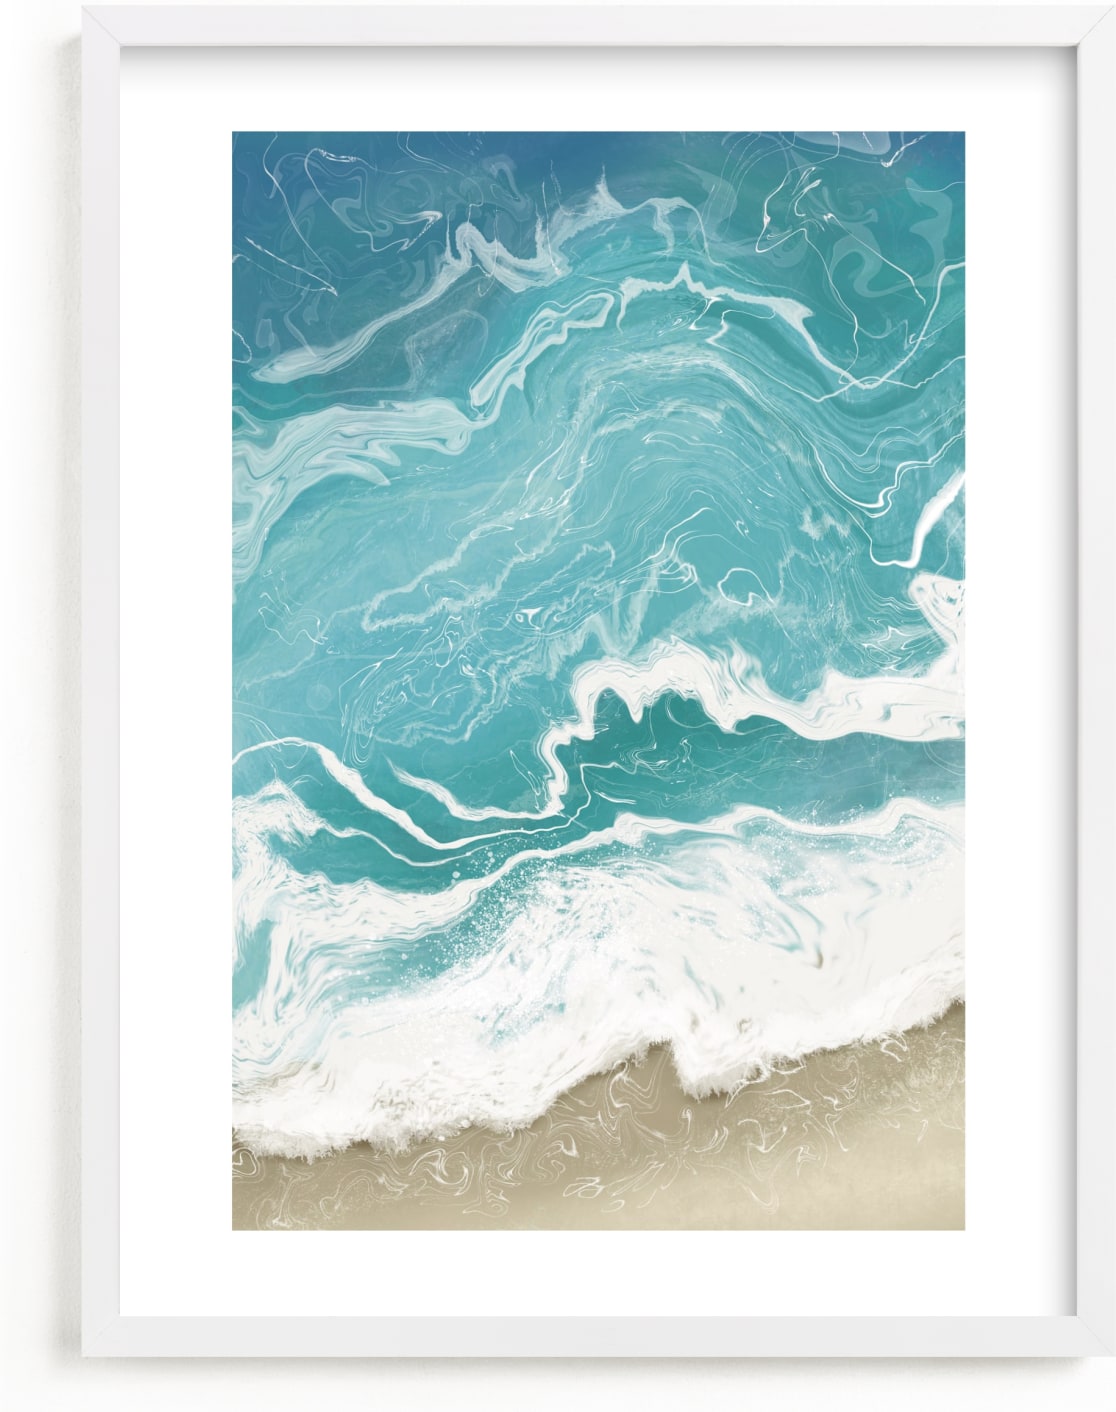 This is a blue art by Paula Pecevich called Incoming Tide.